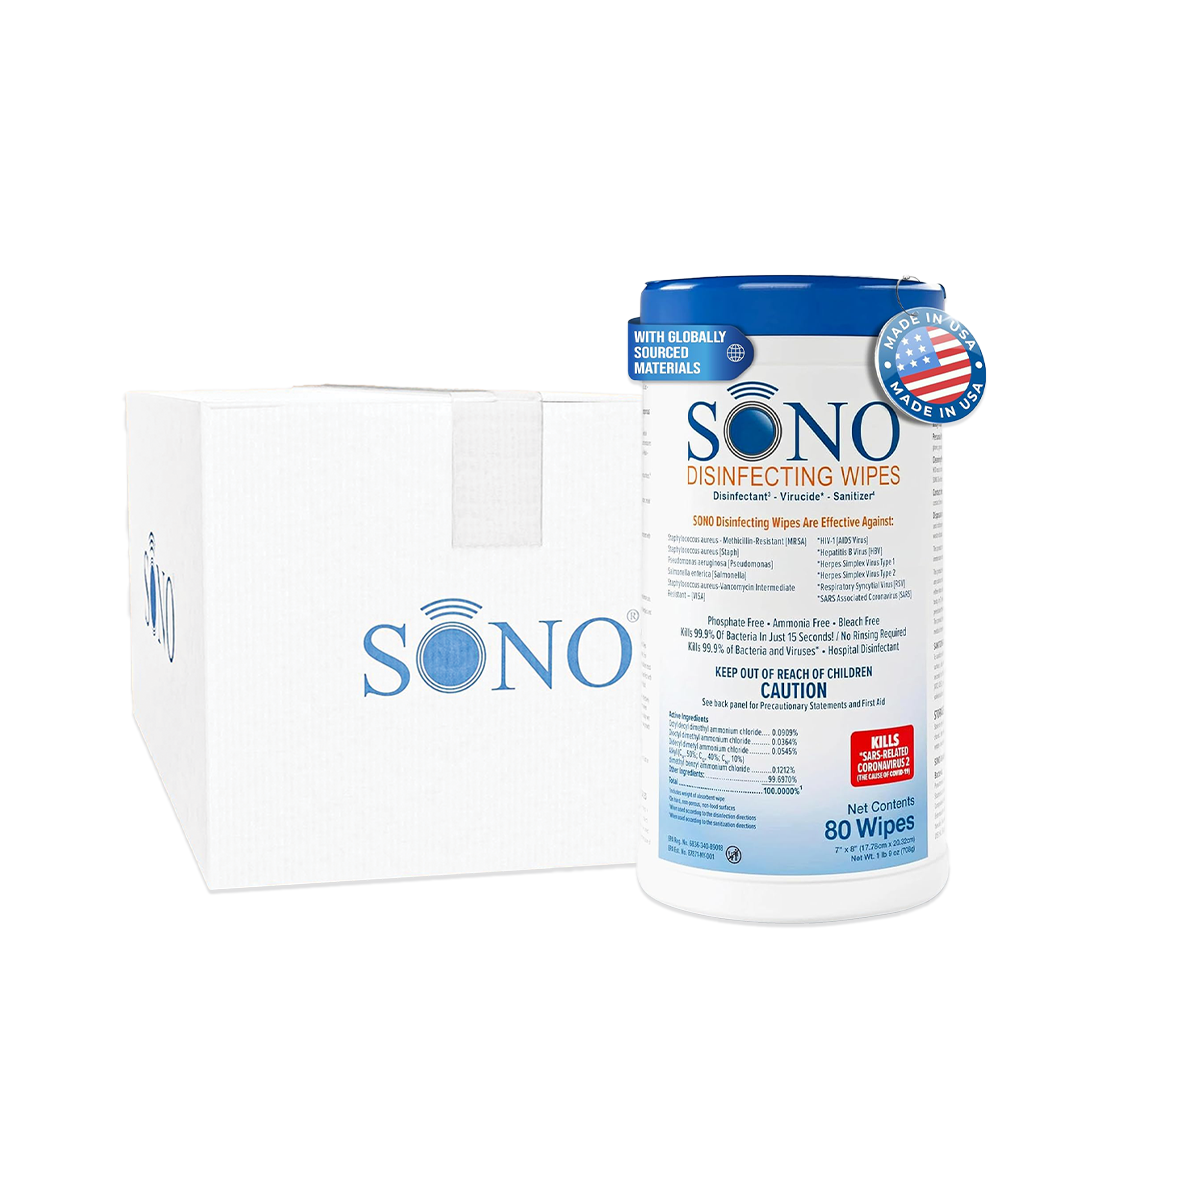 SONO Disinfecting Wipes Canister (6 Pack)